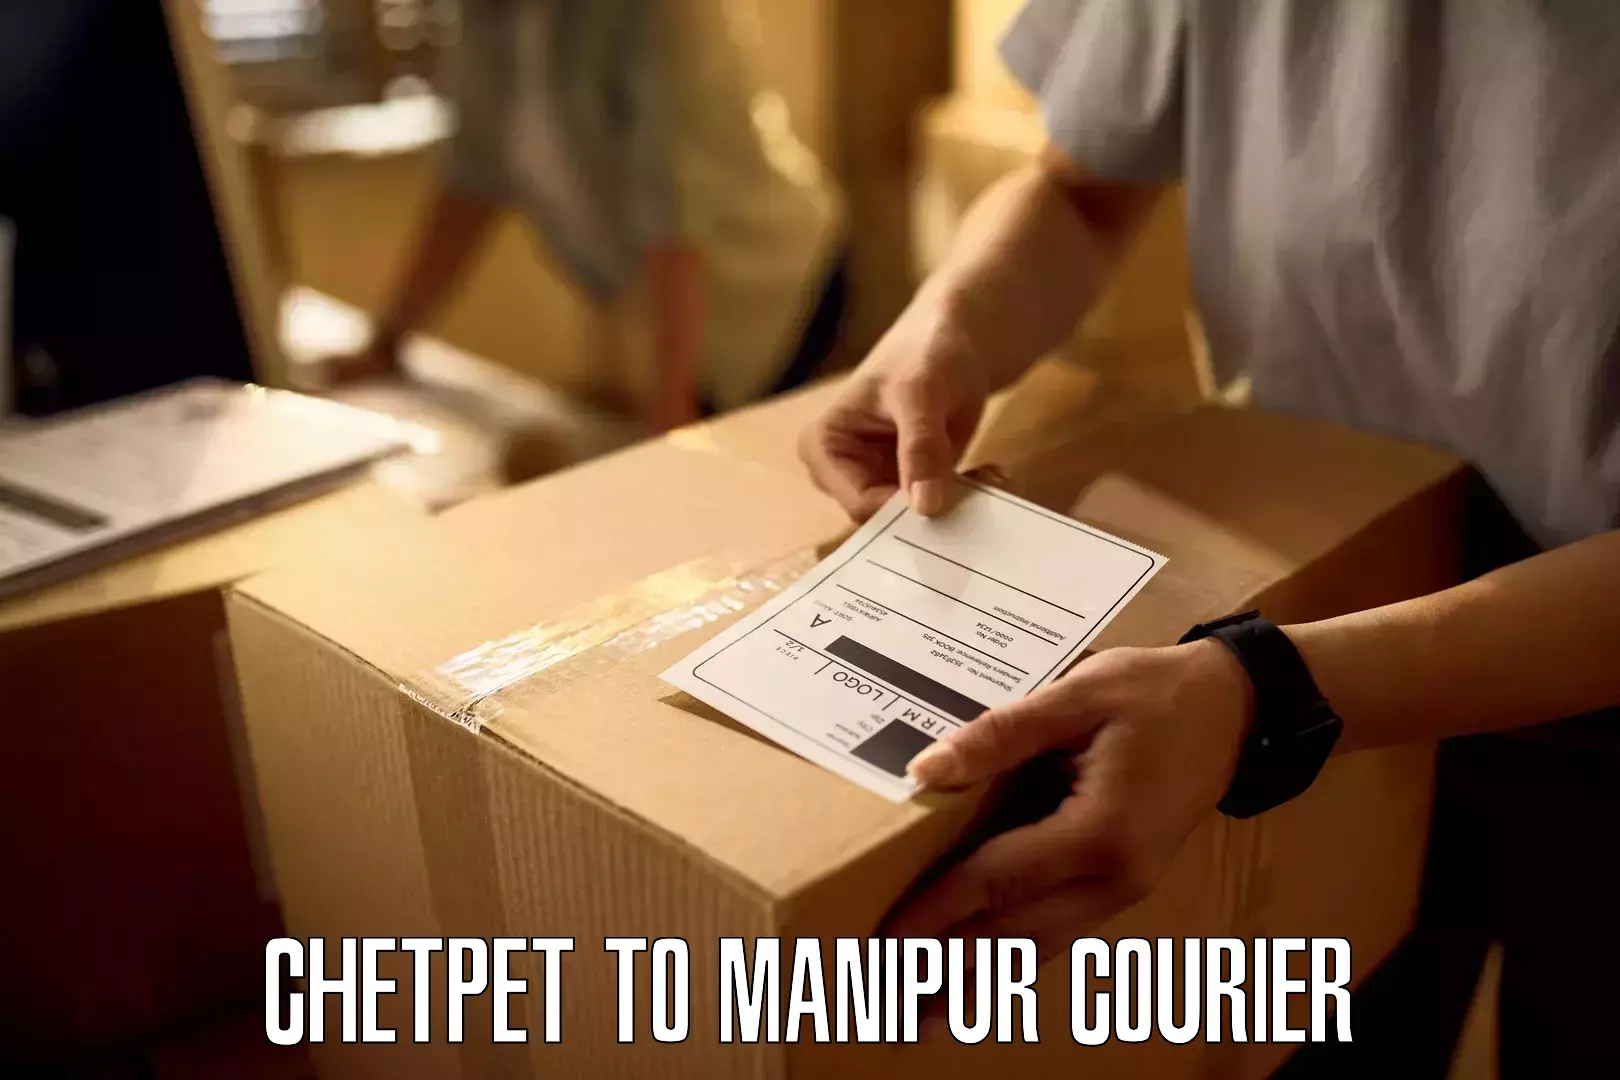 Corporate courier solutions Chetpet to Chandel